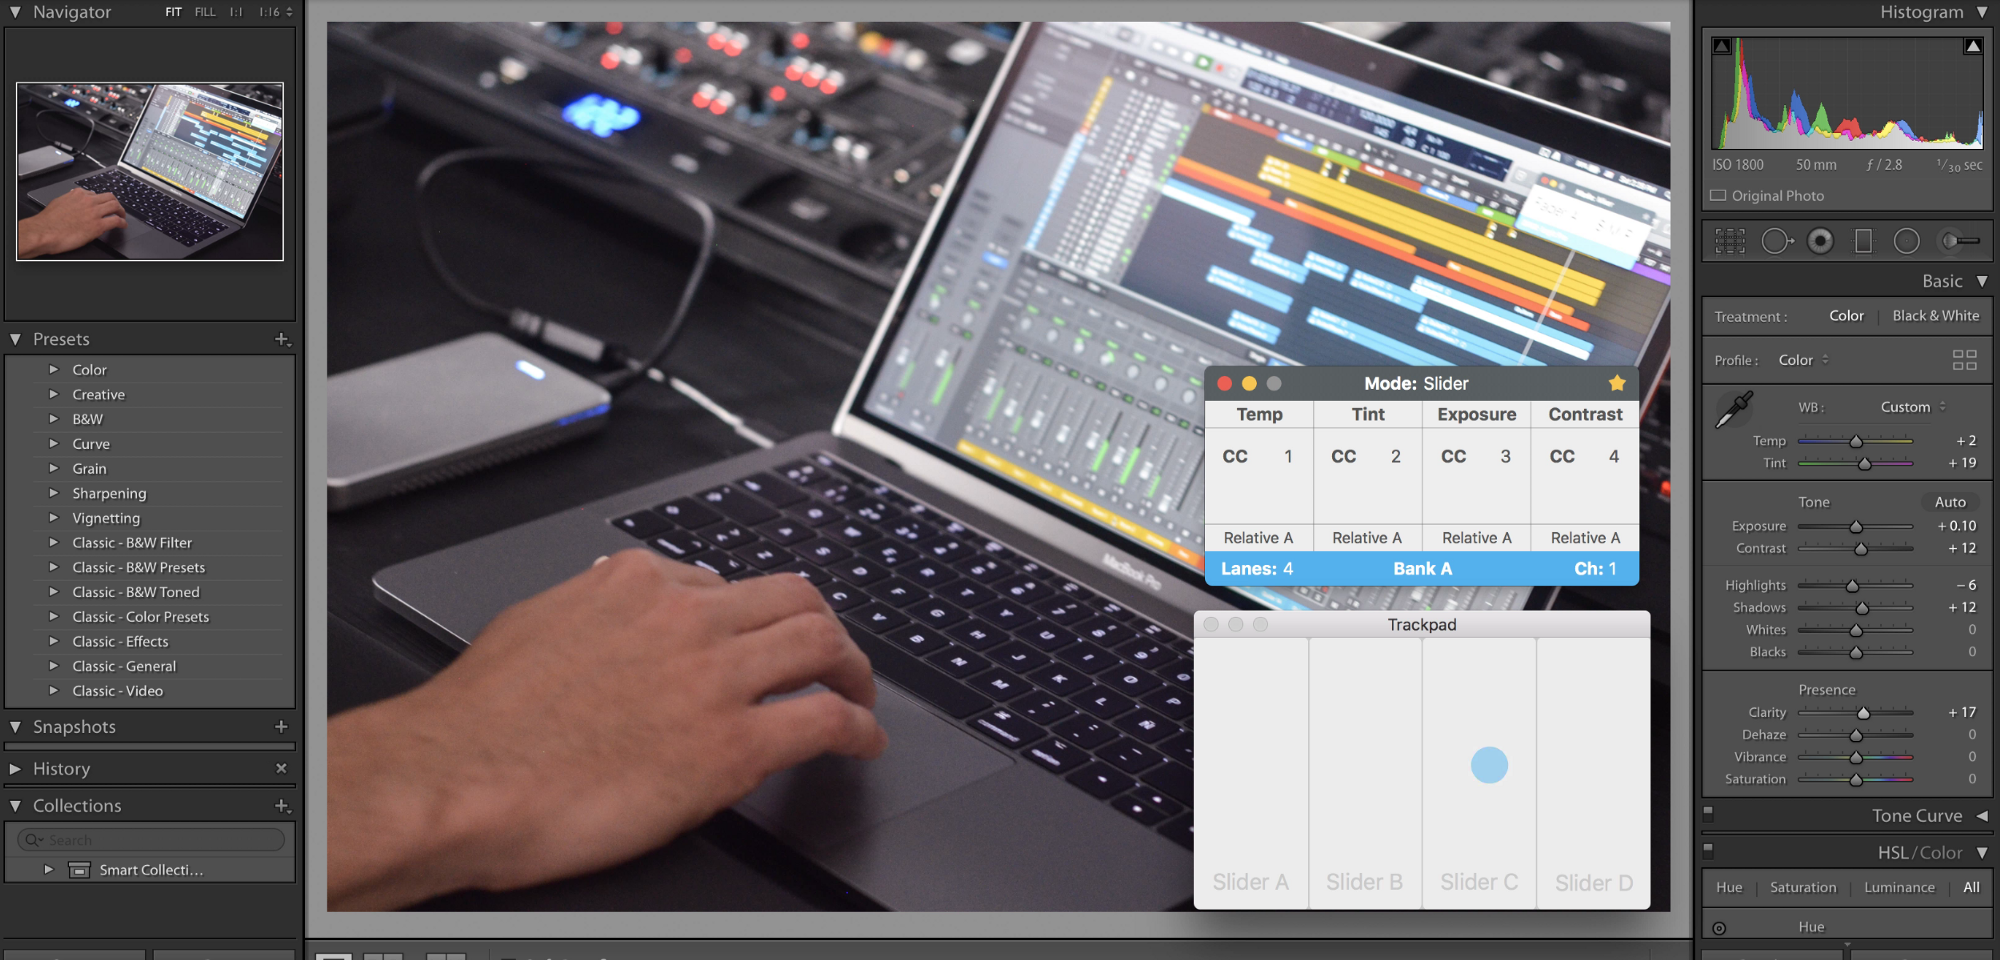 AudioSwift 2 – Control, Improve & Create with your Trackpad